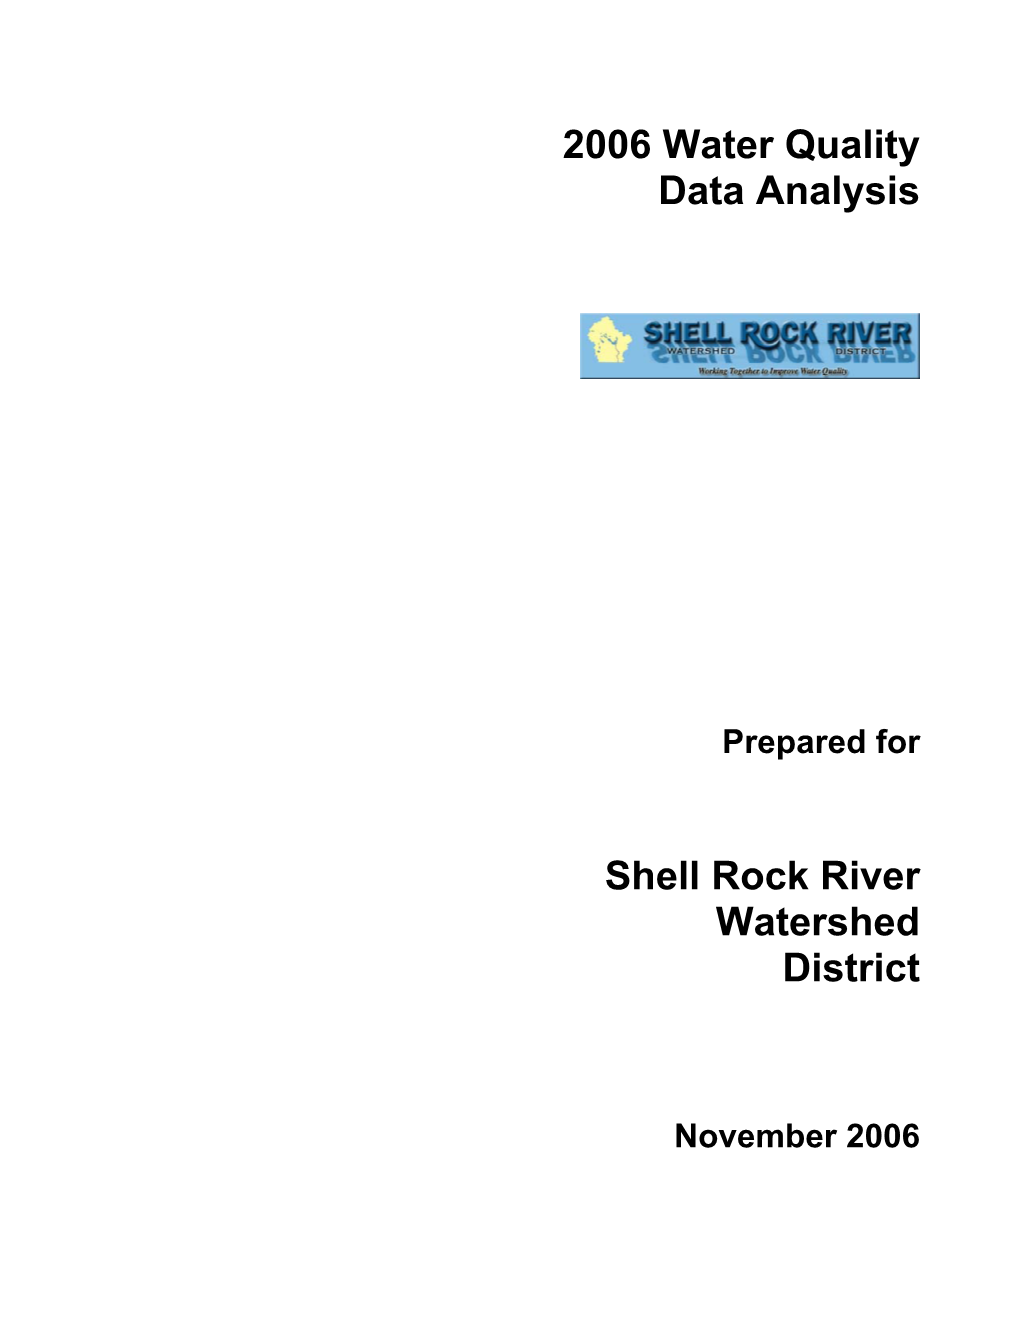 2006 Water Monitor Report